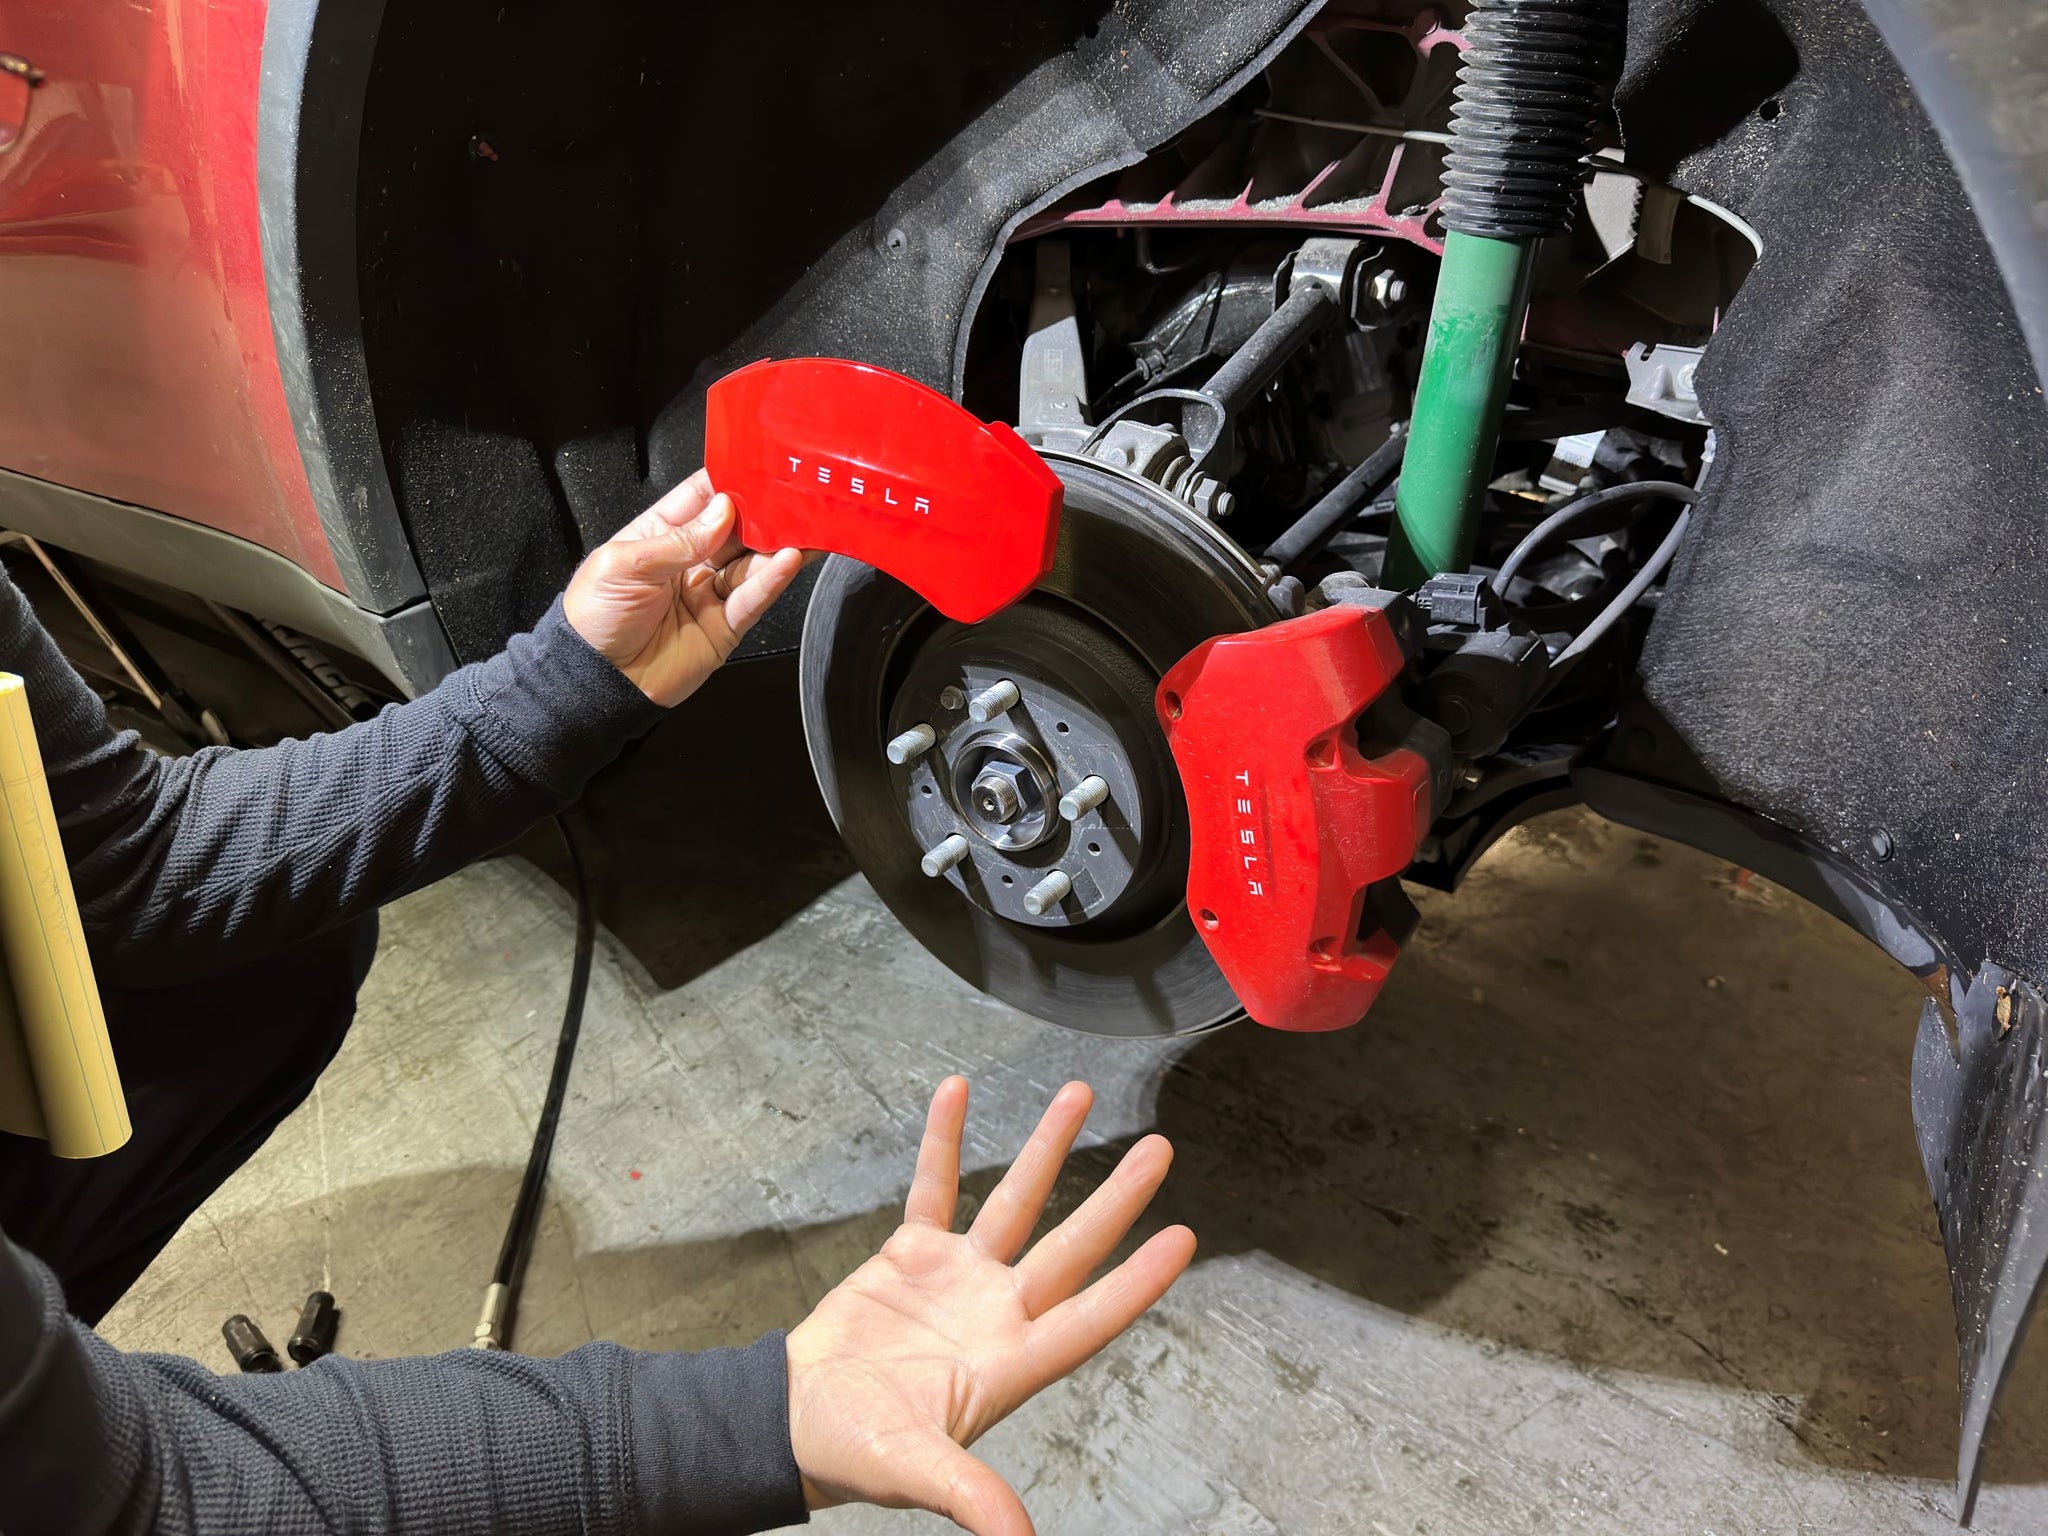 Tesla Model Y Performance Has Smaller Rear Brake Calipers With